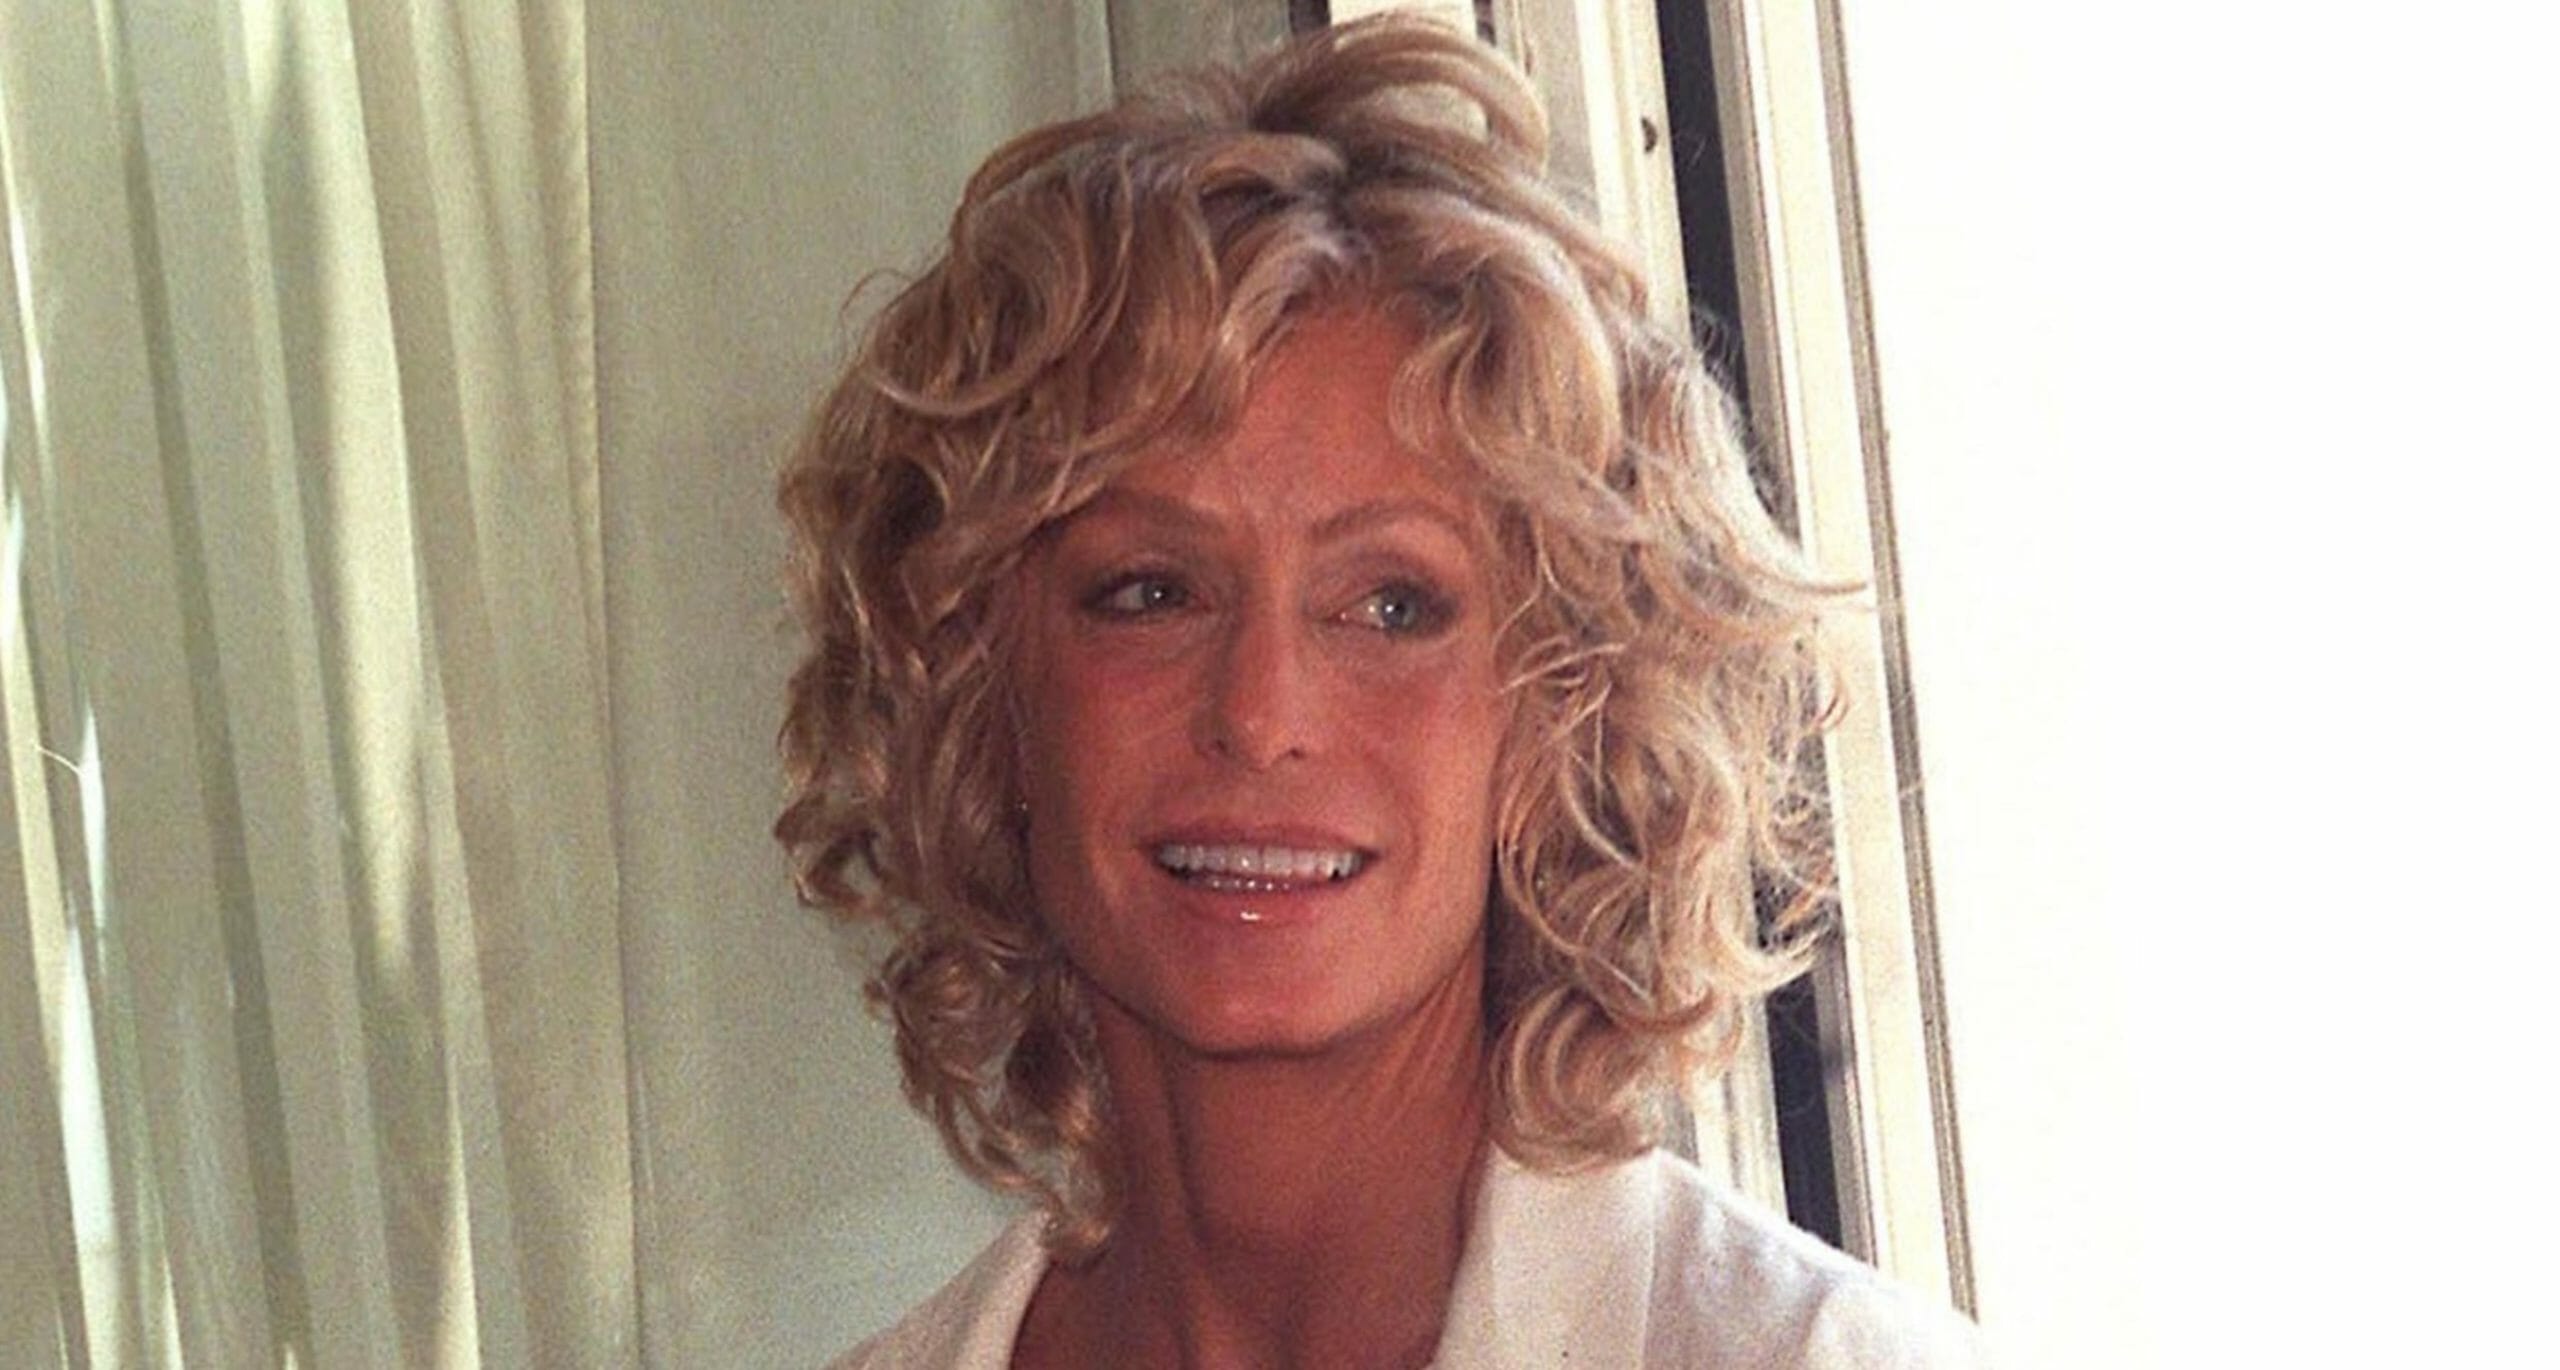 Ryan O'Neal proposed to Farrah Fawcett on her deathbed, but she died in